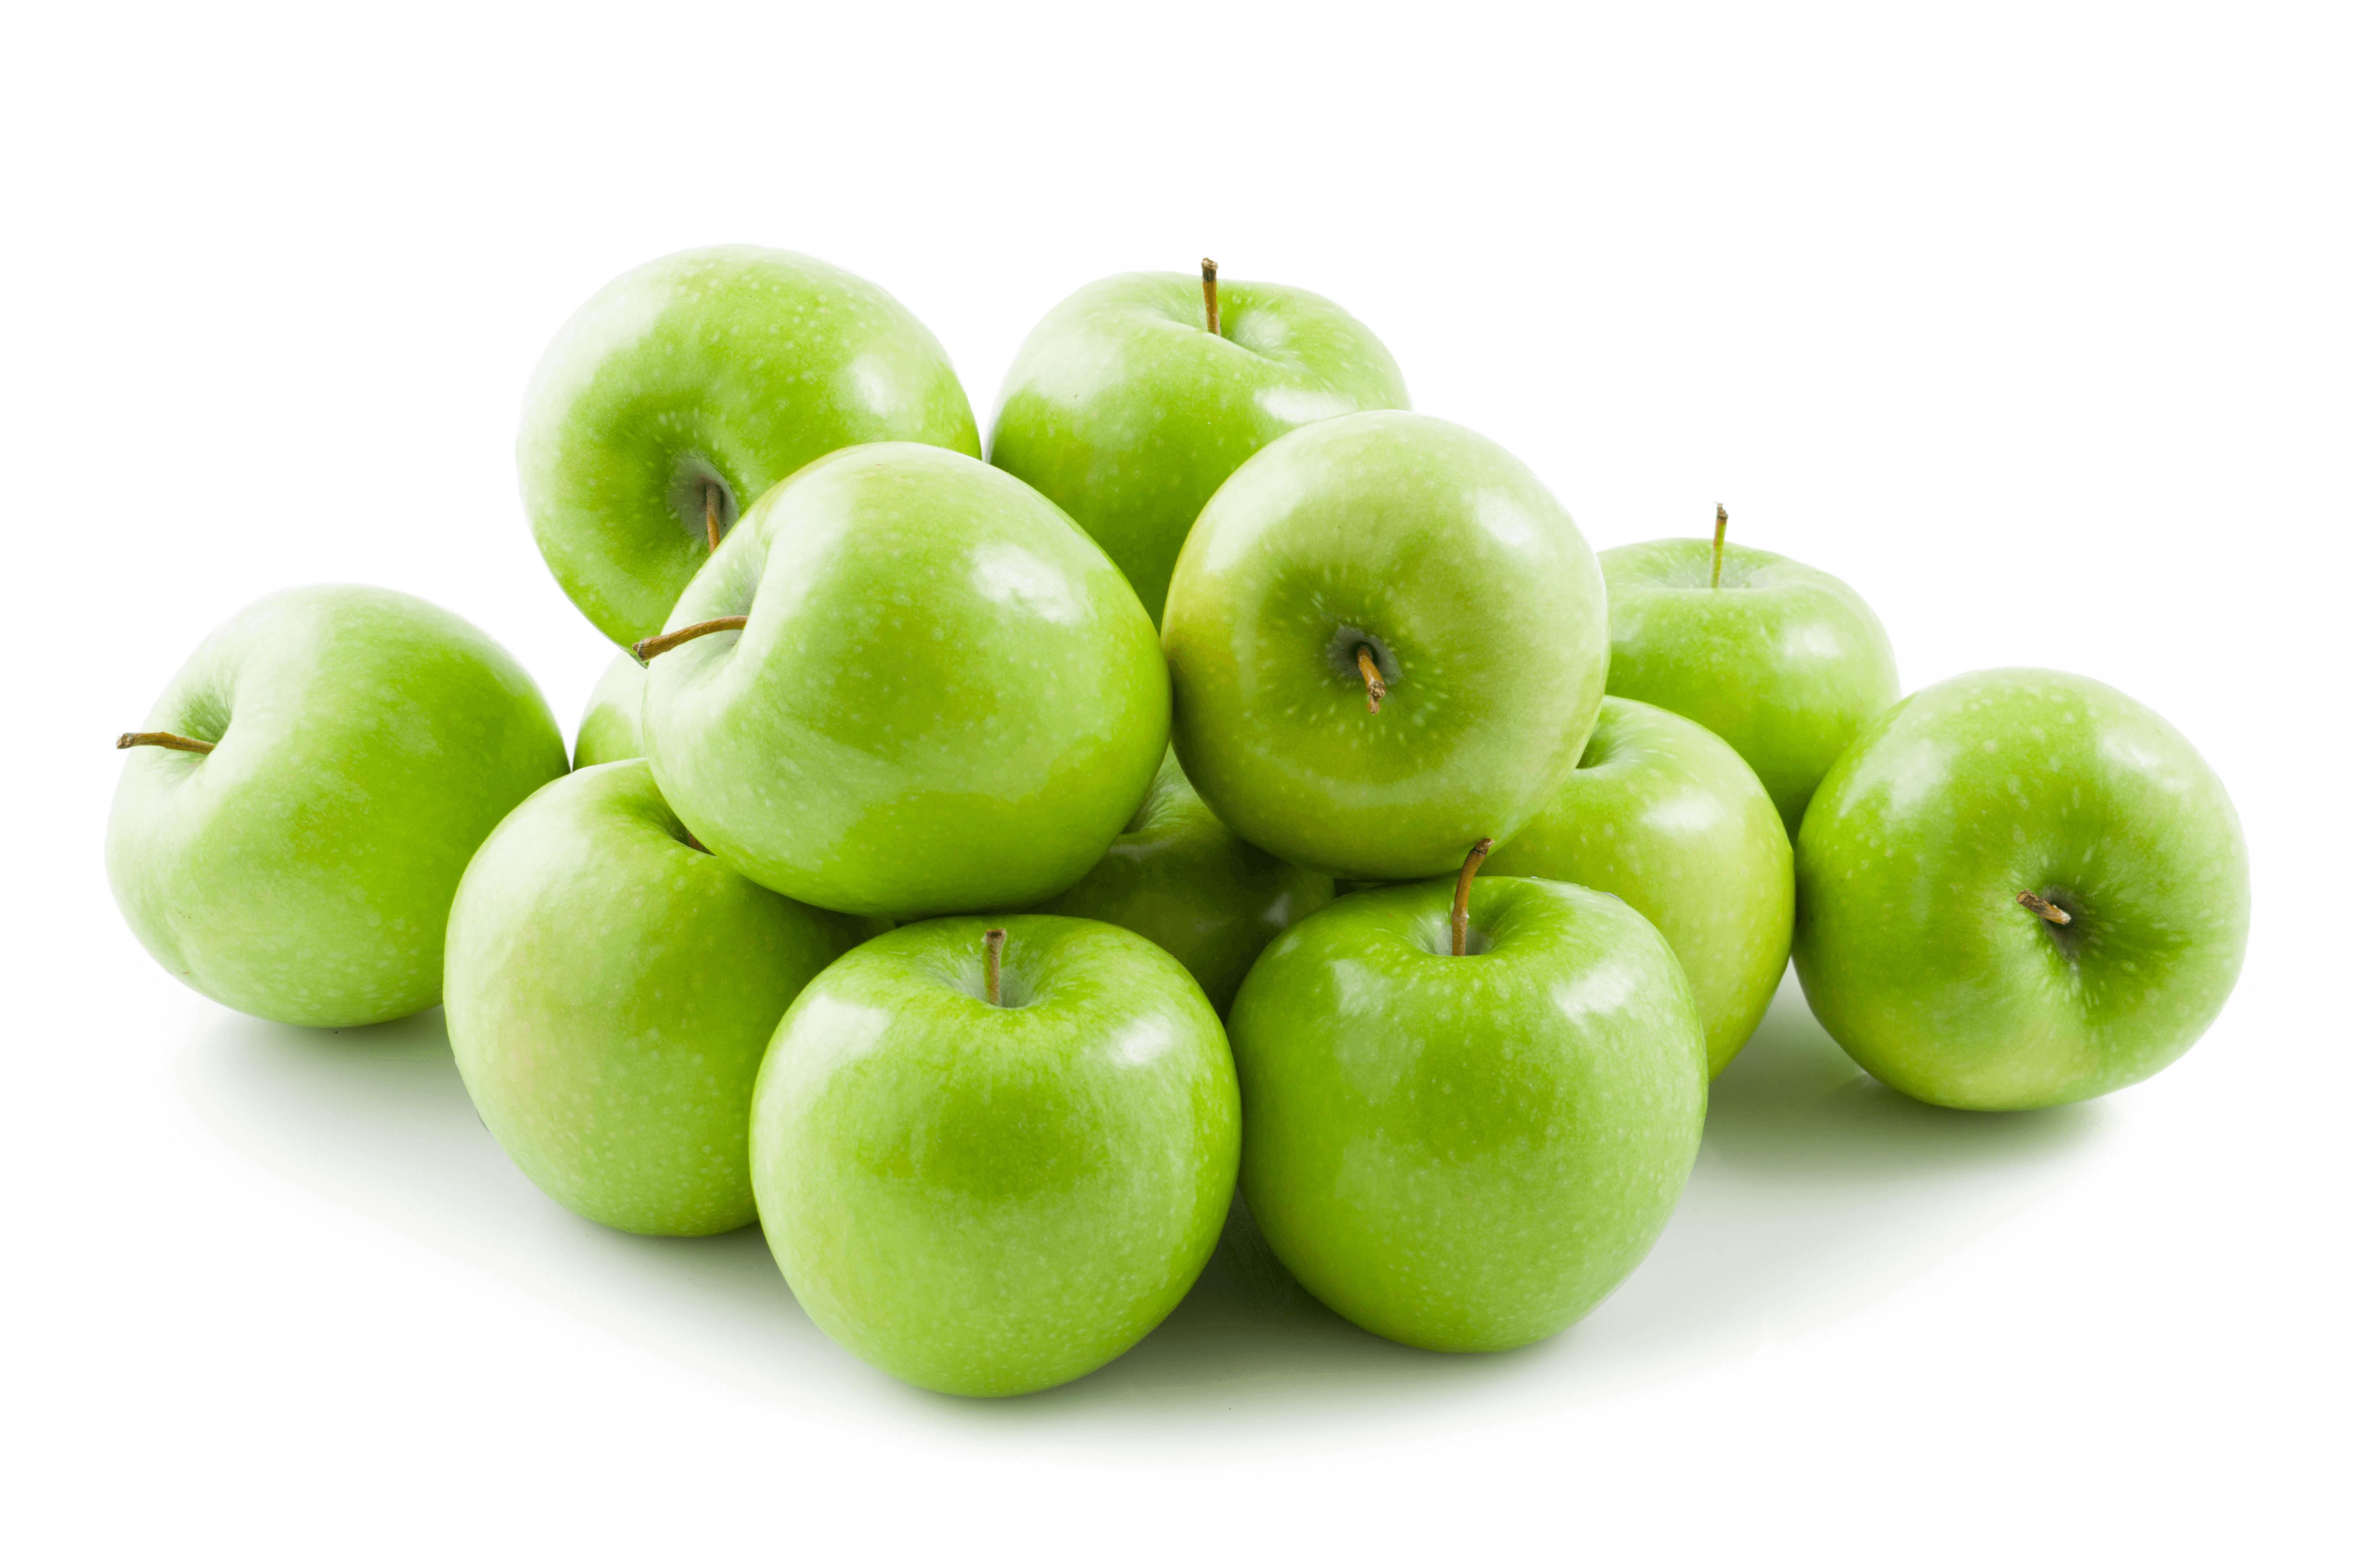 The Best Apples for the Gerson Therapy Diet